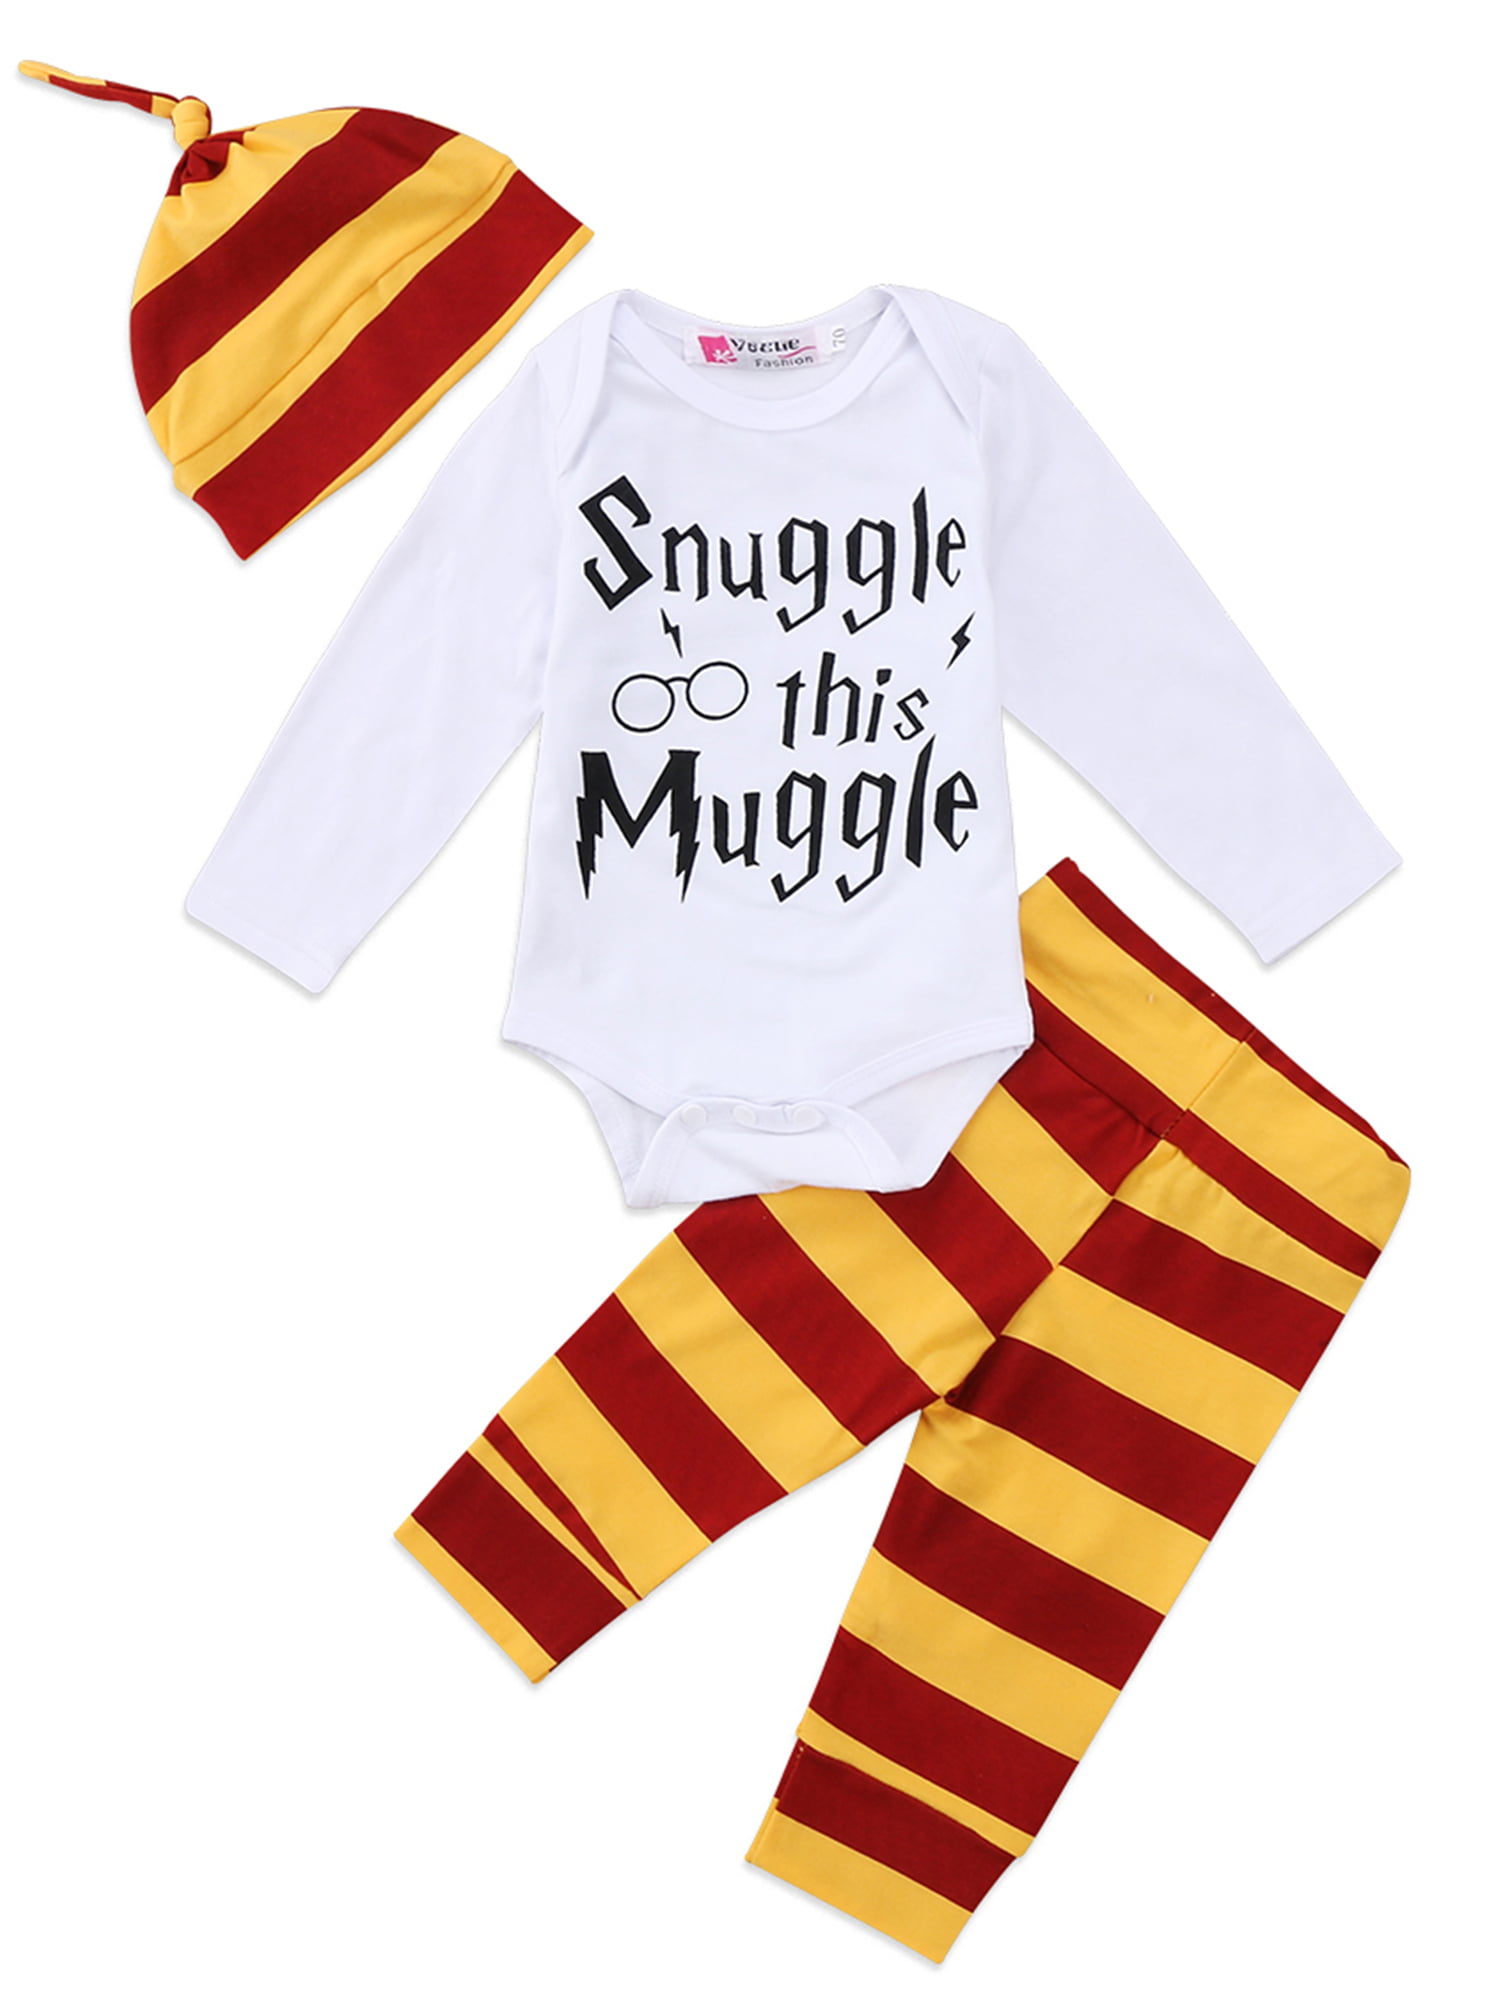 3PCS Harry Potter Snuggle This Muggle Baby Boy Clothes Top Pants Beanie Outfit 